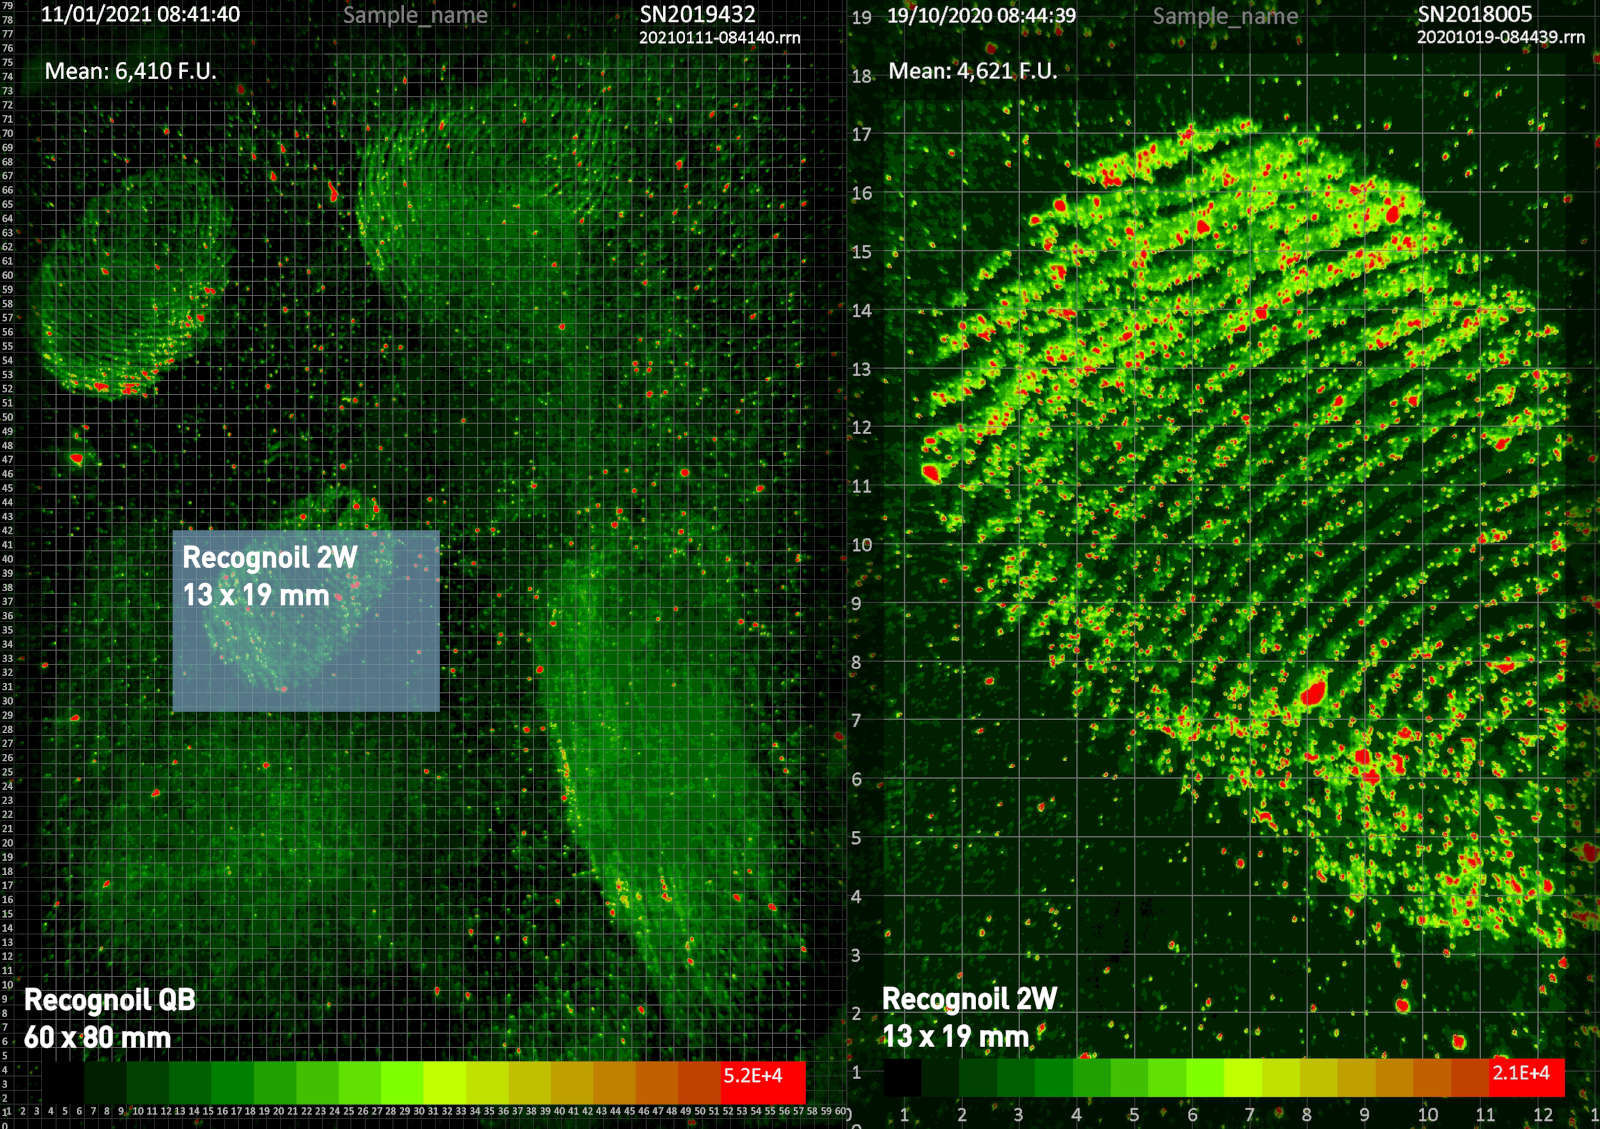 Main image output from Recognoil QB device - fluorescence map of the distribution of oil and grease contamination on the surface of the part